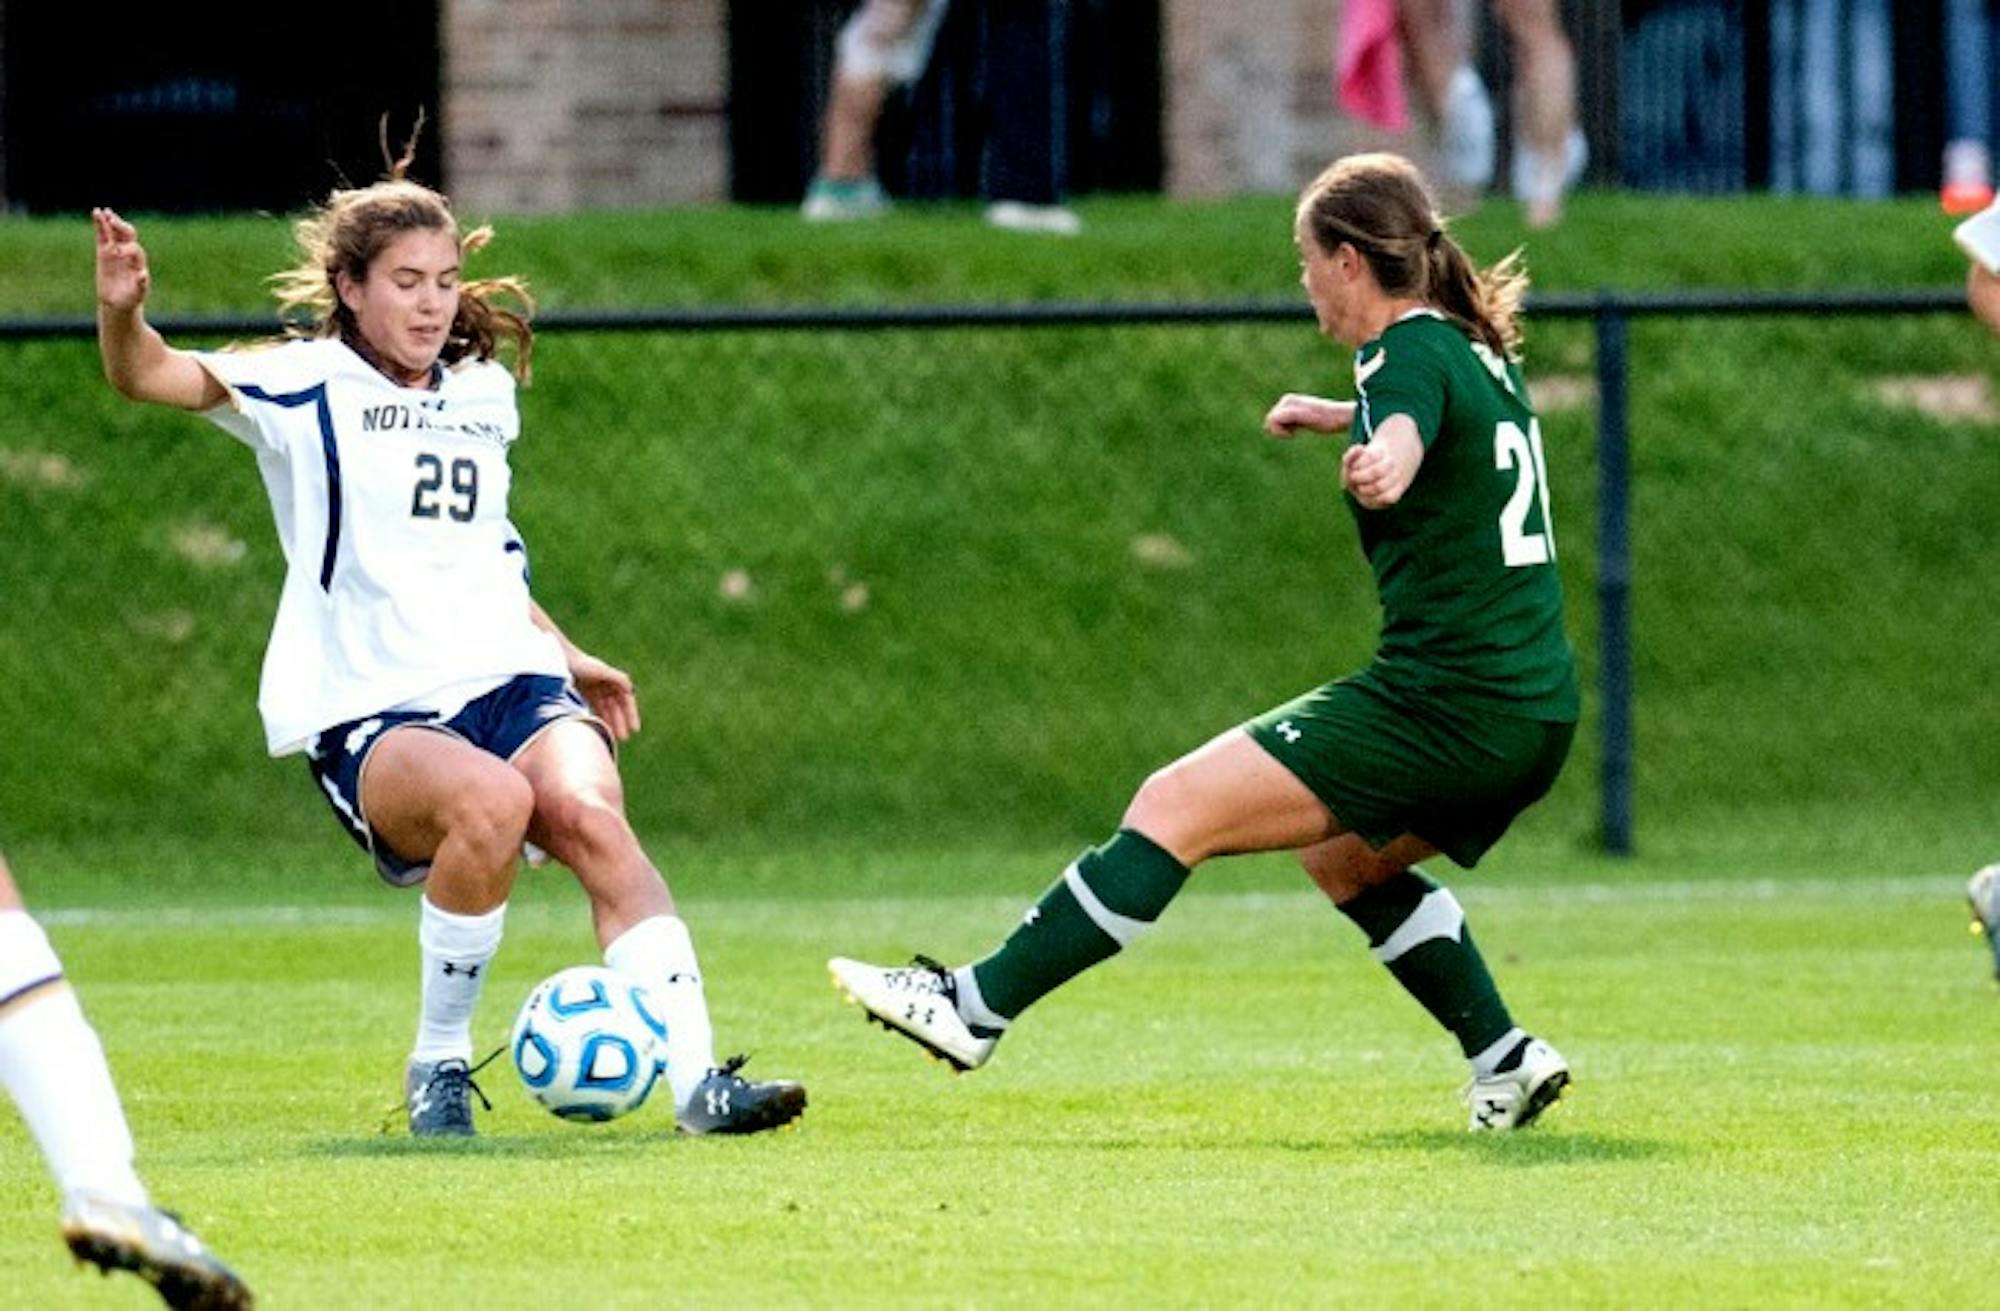 Irish freshman midfielder Taylor Klawunder dribbles the ball forward during Notre Dame’s 1-0 win against Baylor on Sept. 12 at Alumni Field. Klawunder scored a goal in Saturday’s loss to UNC.